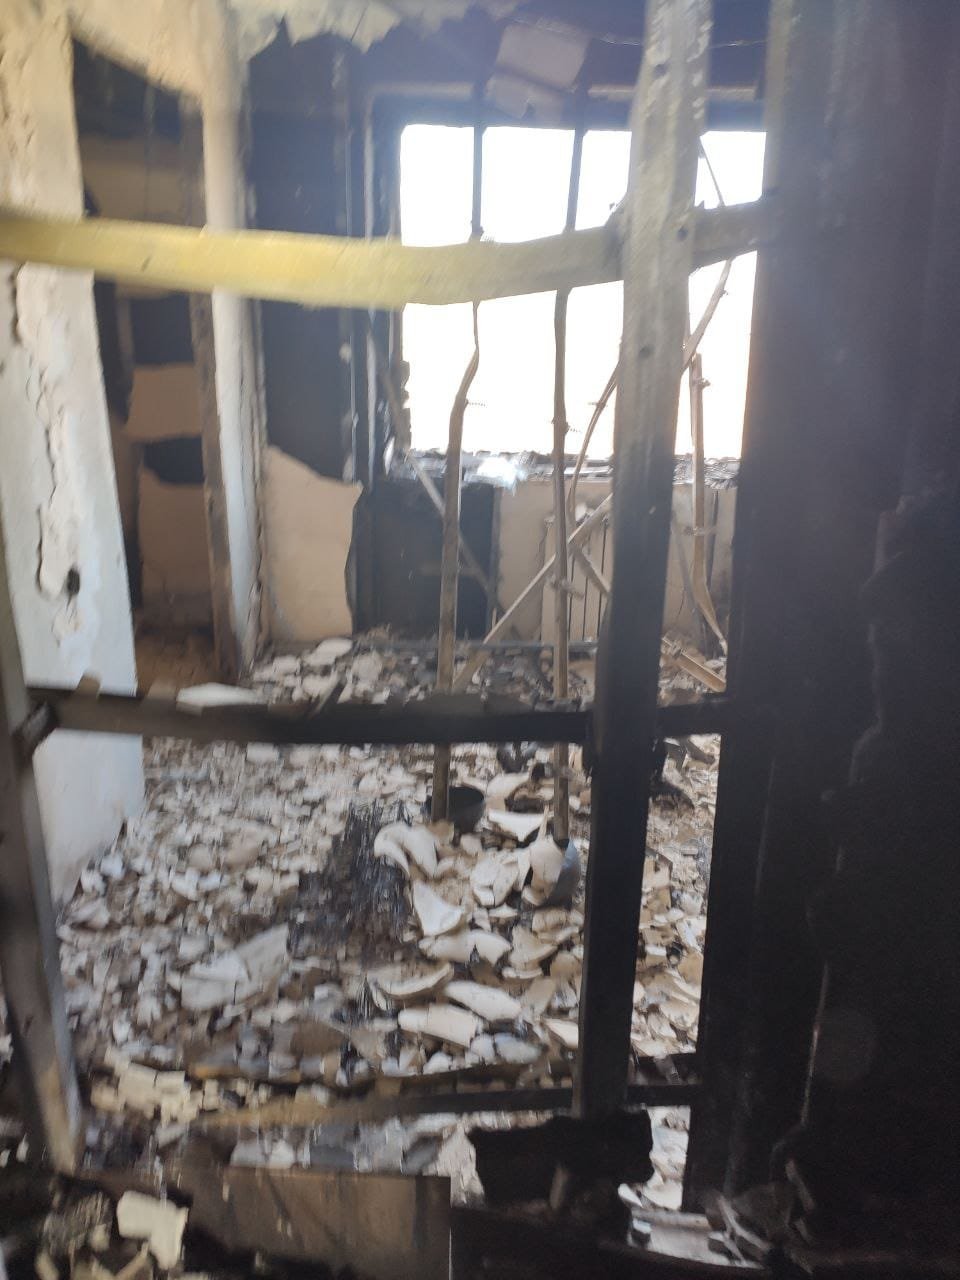 Mila's burnt-out apartment in Mariupol.